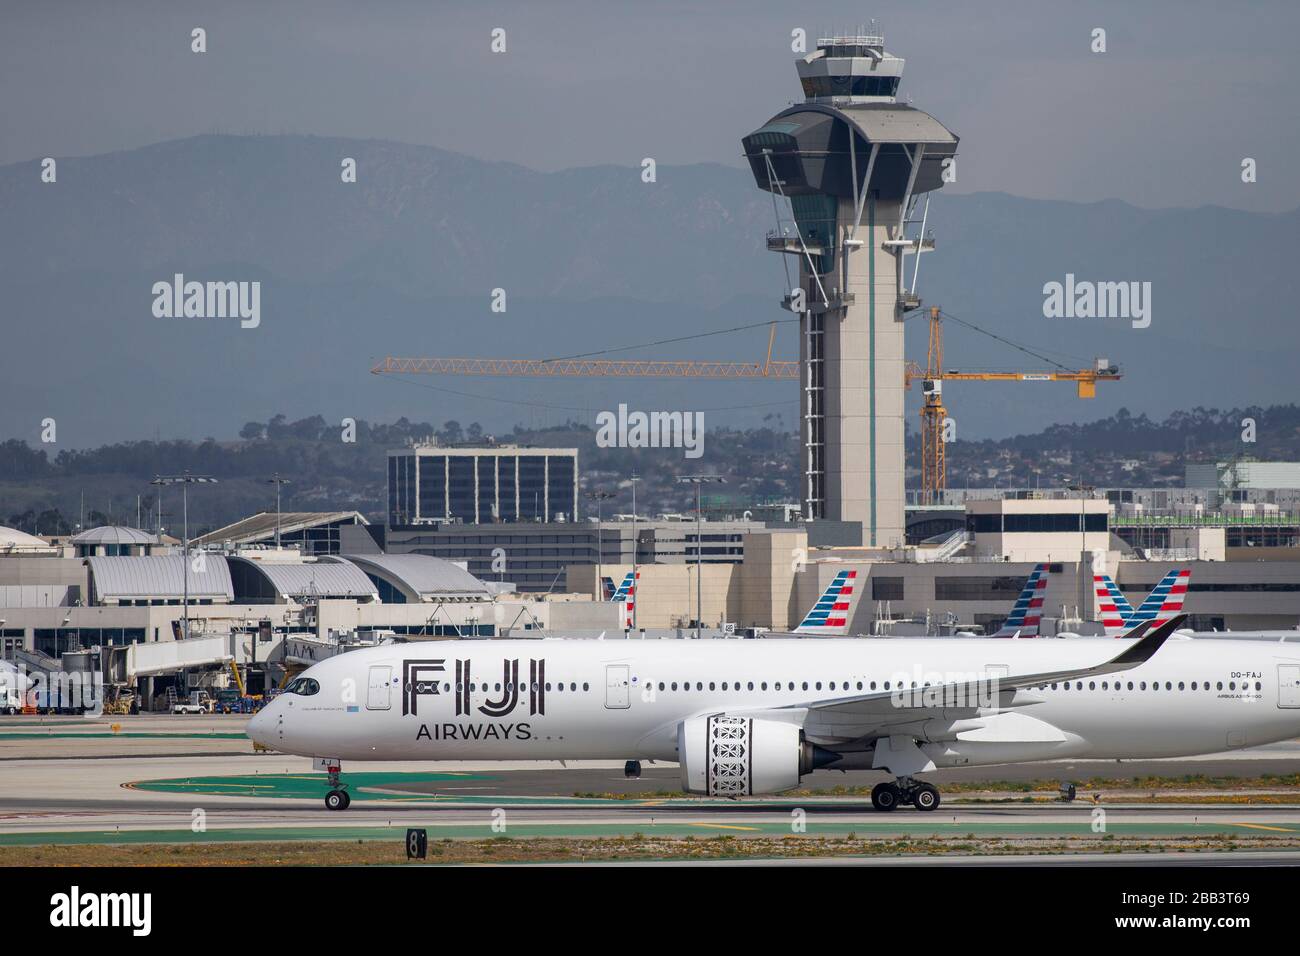 A Fiji Airways A350-900 taxis after landing at Los Angeles International Airport (LAX) on Saturday, February 29th, 2020 in Los Angeles, California, USA. (Photo by IOS/Espa-Images) Stock Photo